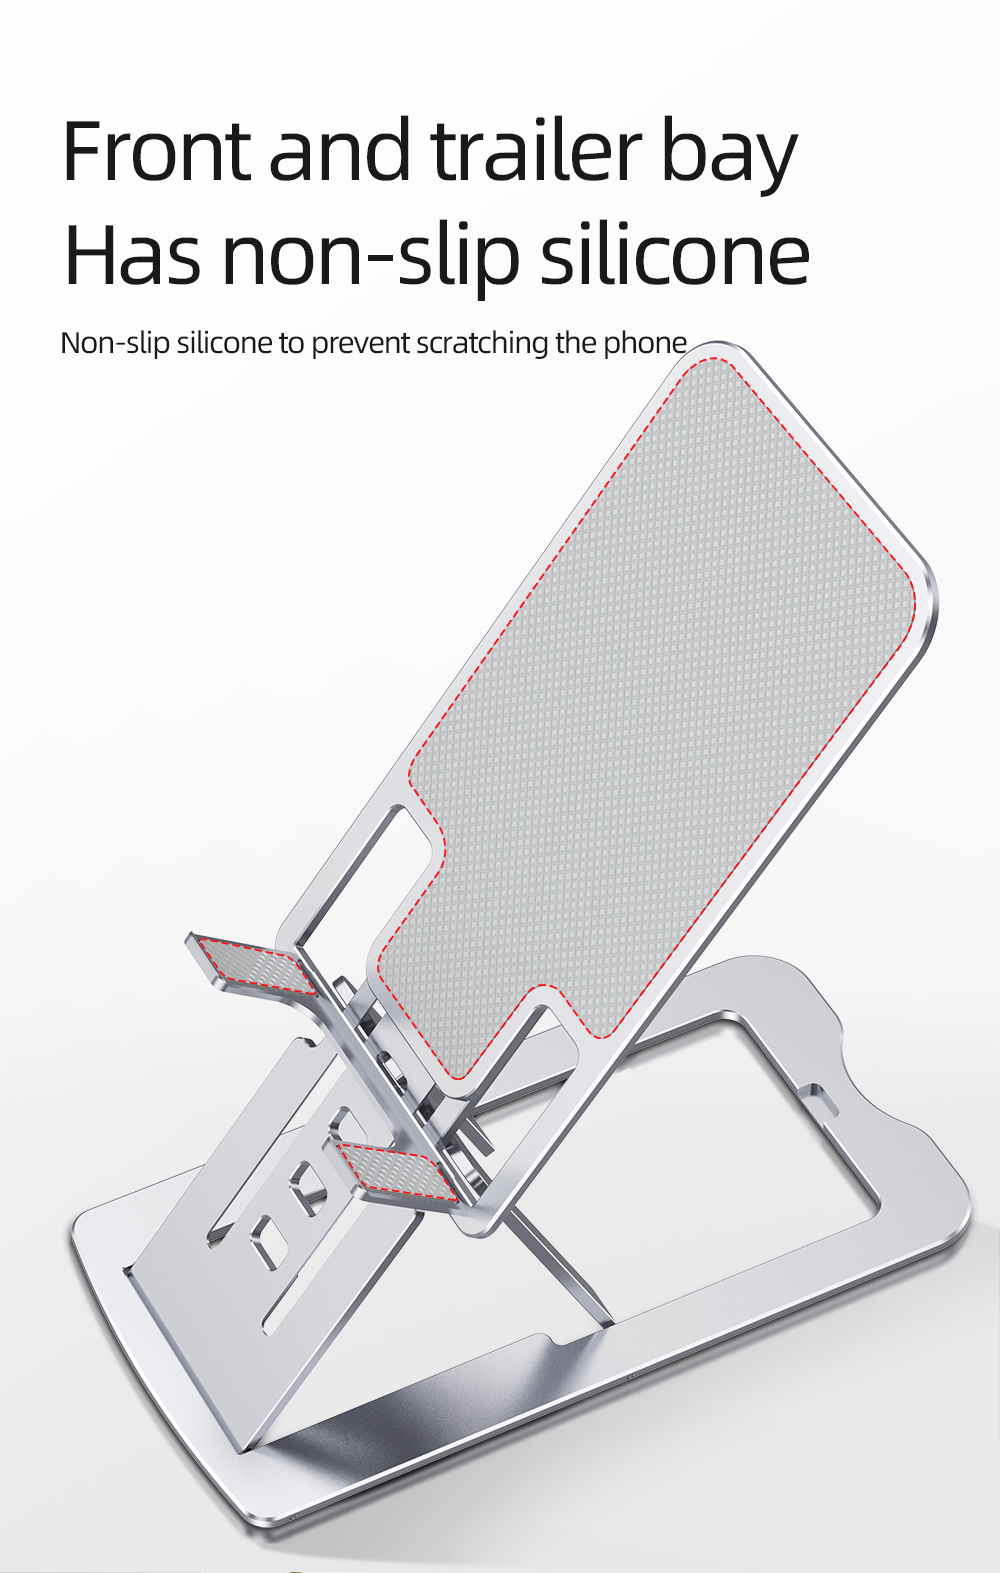 Bakeey-Aluminum-Alloy-PhoneTablet-Stand-Foldable-Height-Adjustable-Desktop-Stand-for-iPhone-12-for-S-1794641-13